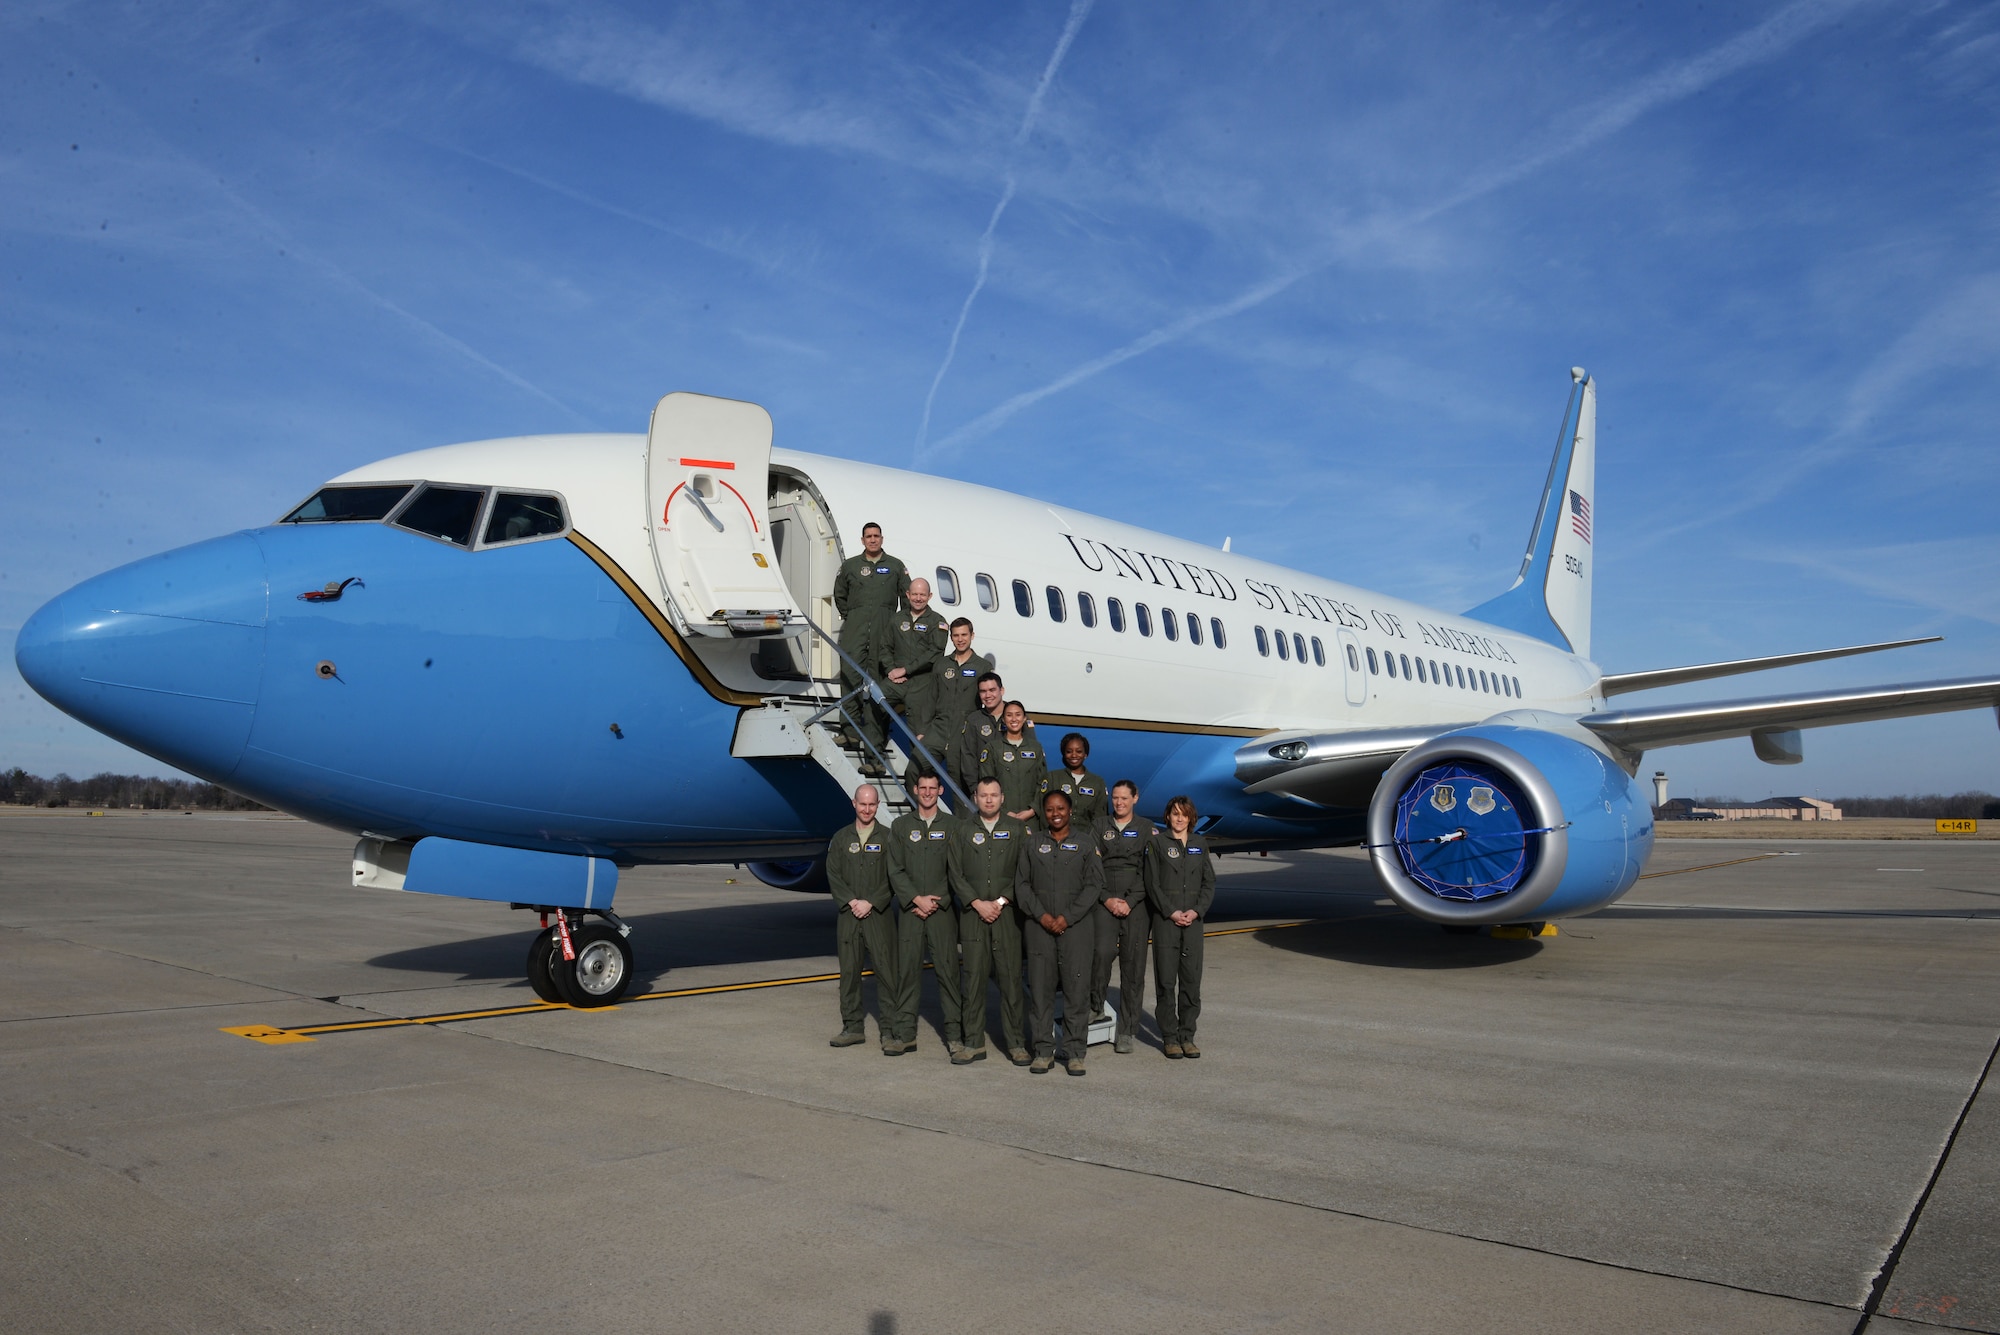 Members from the 54th Airlift Squadron and the 73d AS are responsible for flying executive airlift for the United States’ key leadership and providing them with safe, comfortable and reliable transportation.  Both squadrons have integrated into one team, consisting of active duty, Air Reserve technicians, and traditional Reserve personnel. In 2016, the team traveled to 85 countries, including Israel, China and Russia.(U.S. Air Force photo by Tech. Sgt. Maria Castle)